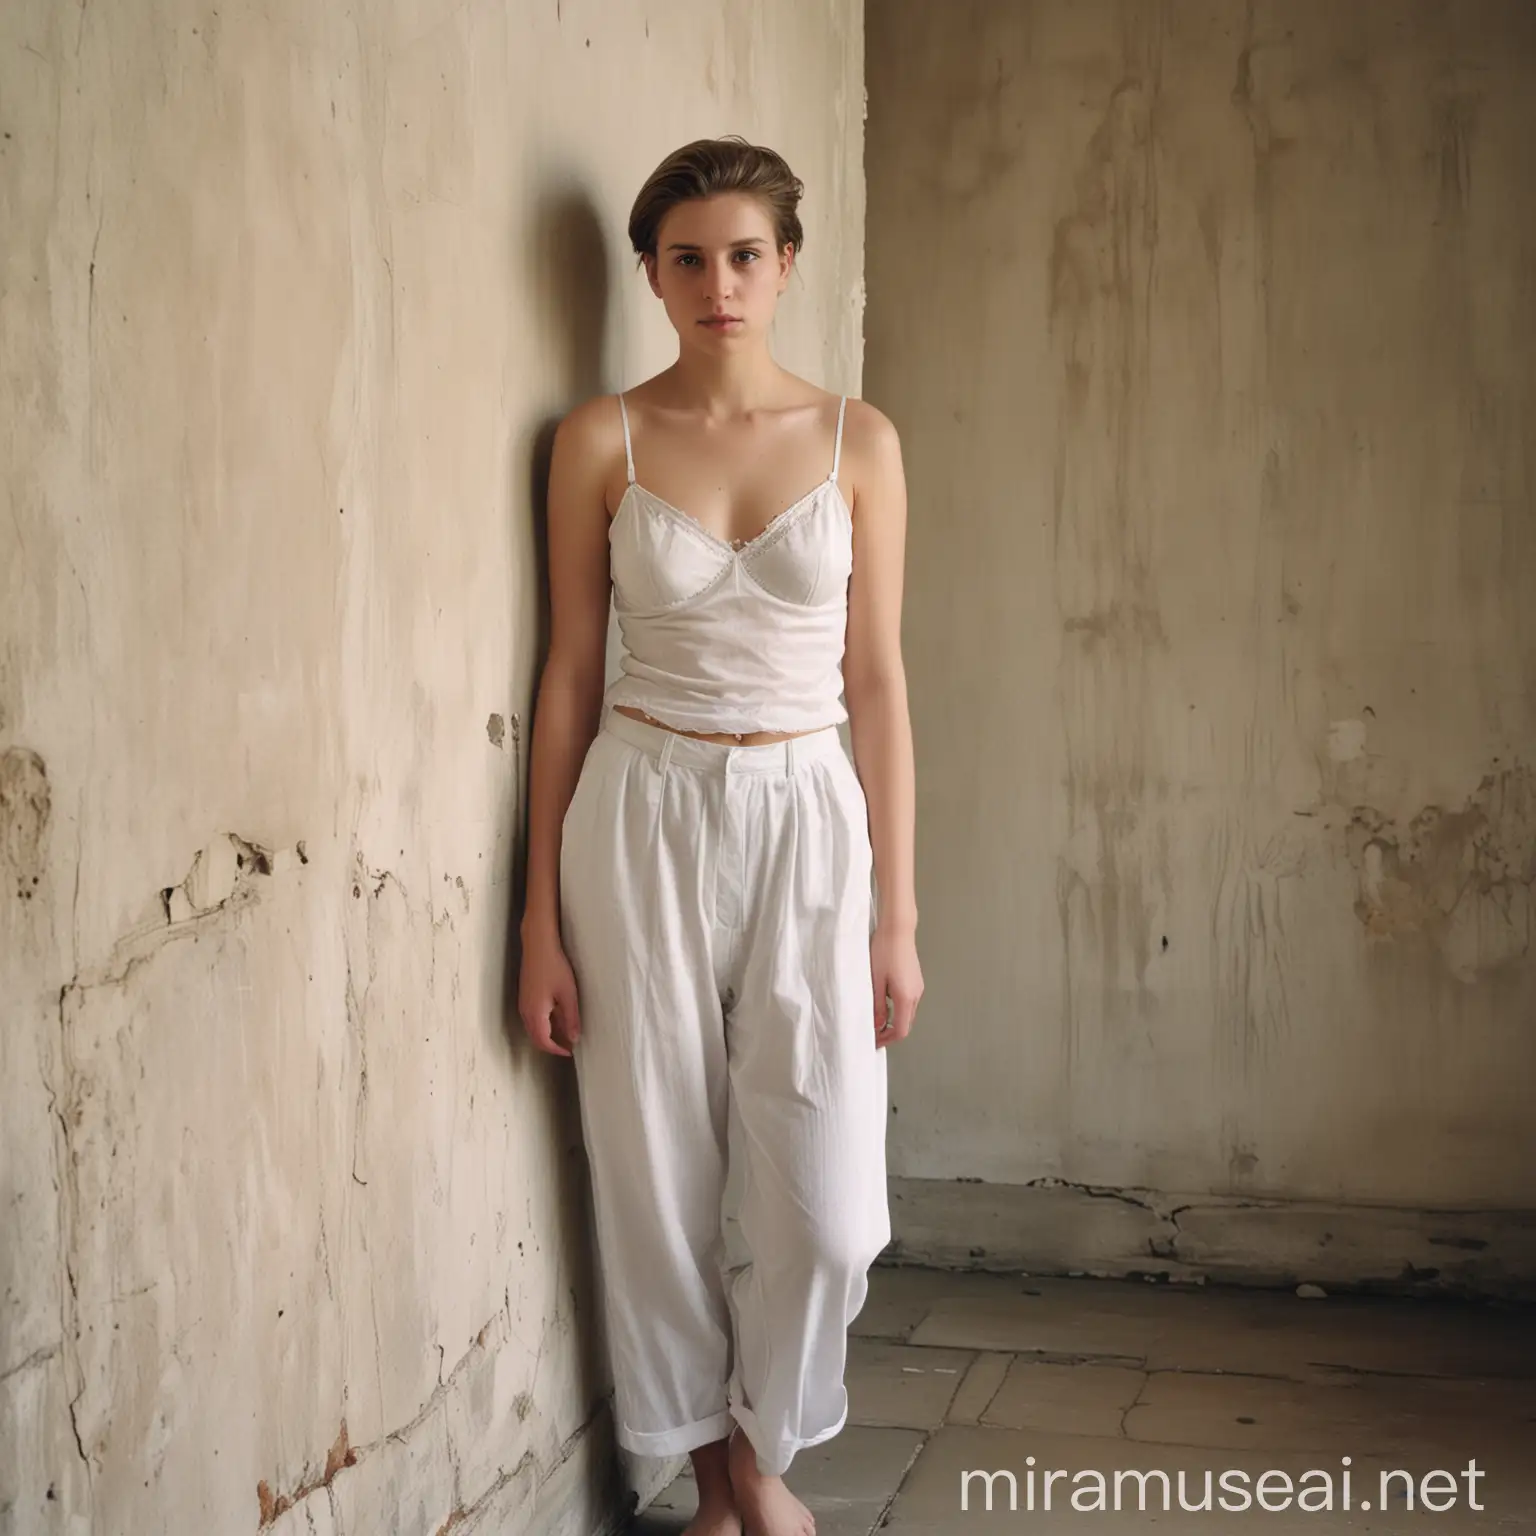 Francesca woodman styled photo of a caucasian woman young, short hair standing up, soft light direction from right, the background a plain old wall. the woman, 20 years old wears lingerie, a white bra and a white pant, she wears also black slippers. The hands are behind her torso. Her glance is neutral and frontal